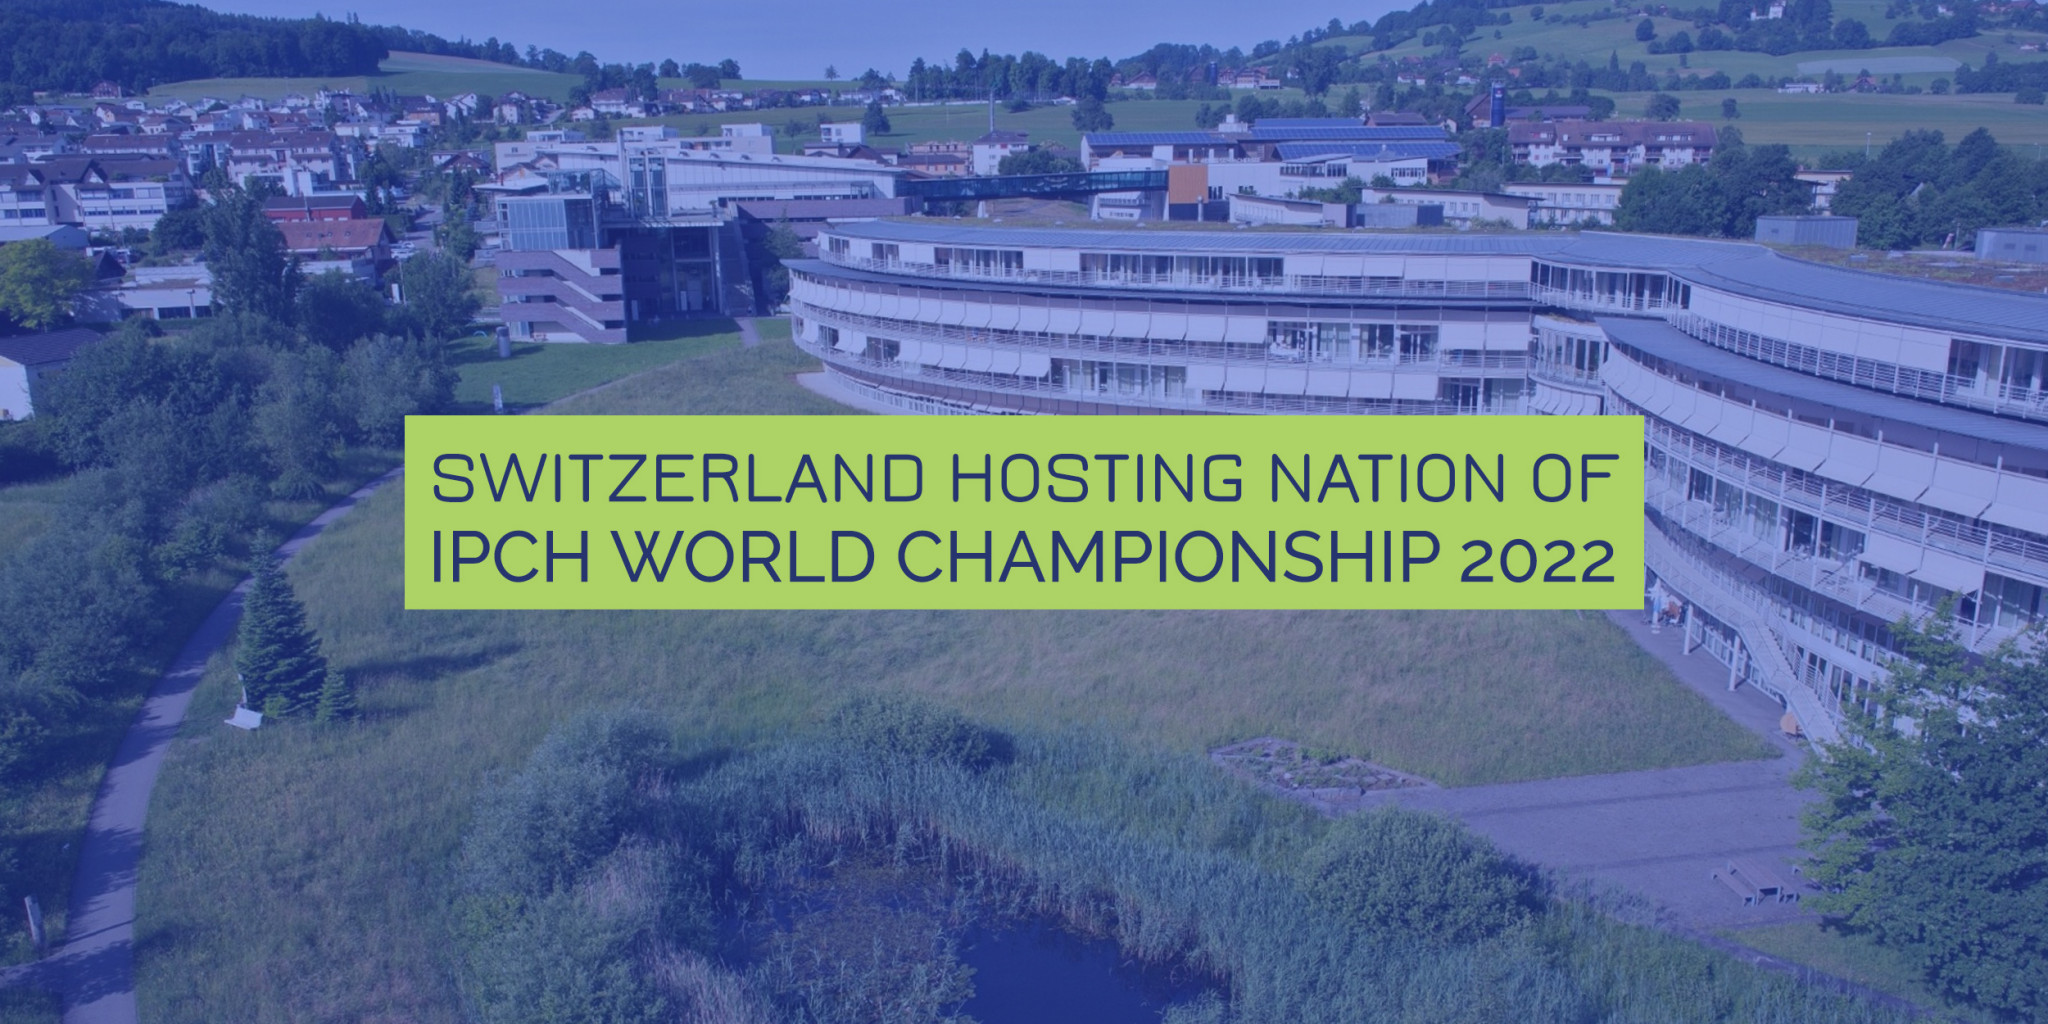 Nottwil in Switzerland has been named as the host of the 2022 Powerchair Hockey World Championship ©IPCH